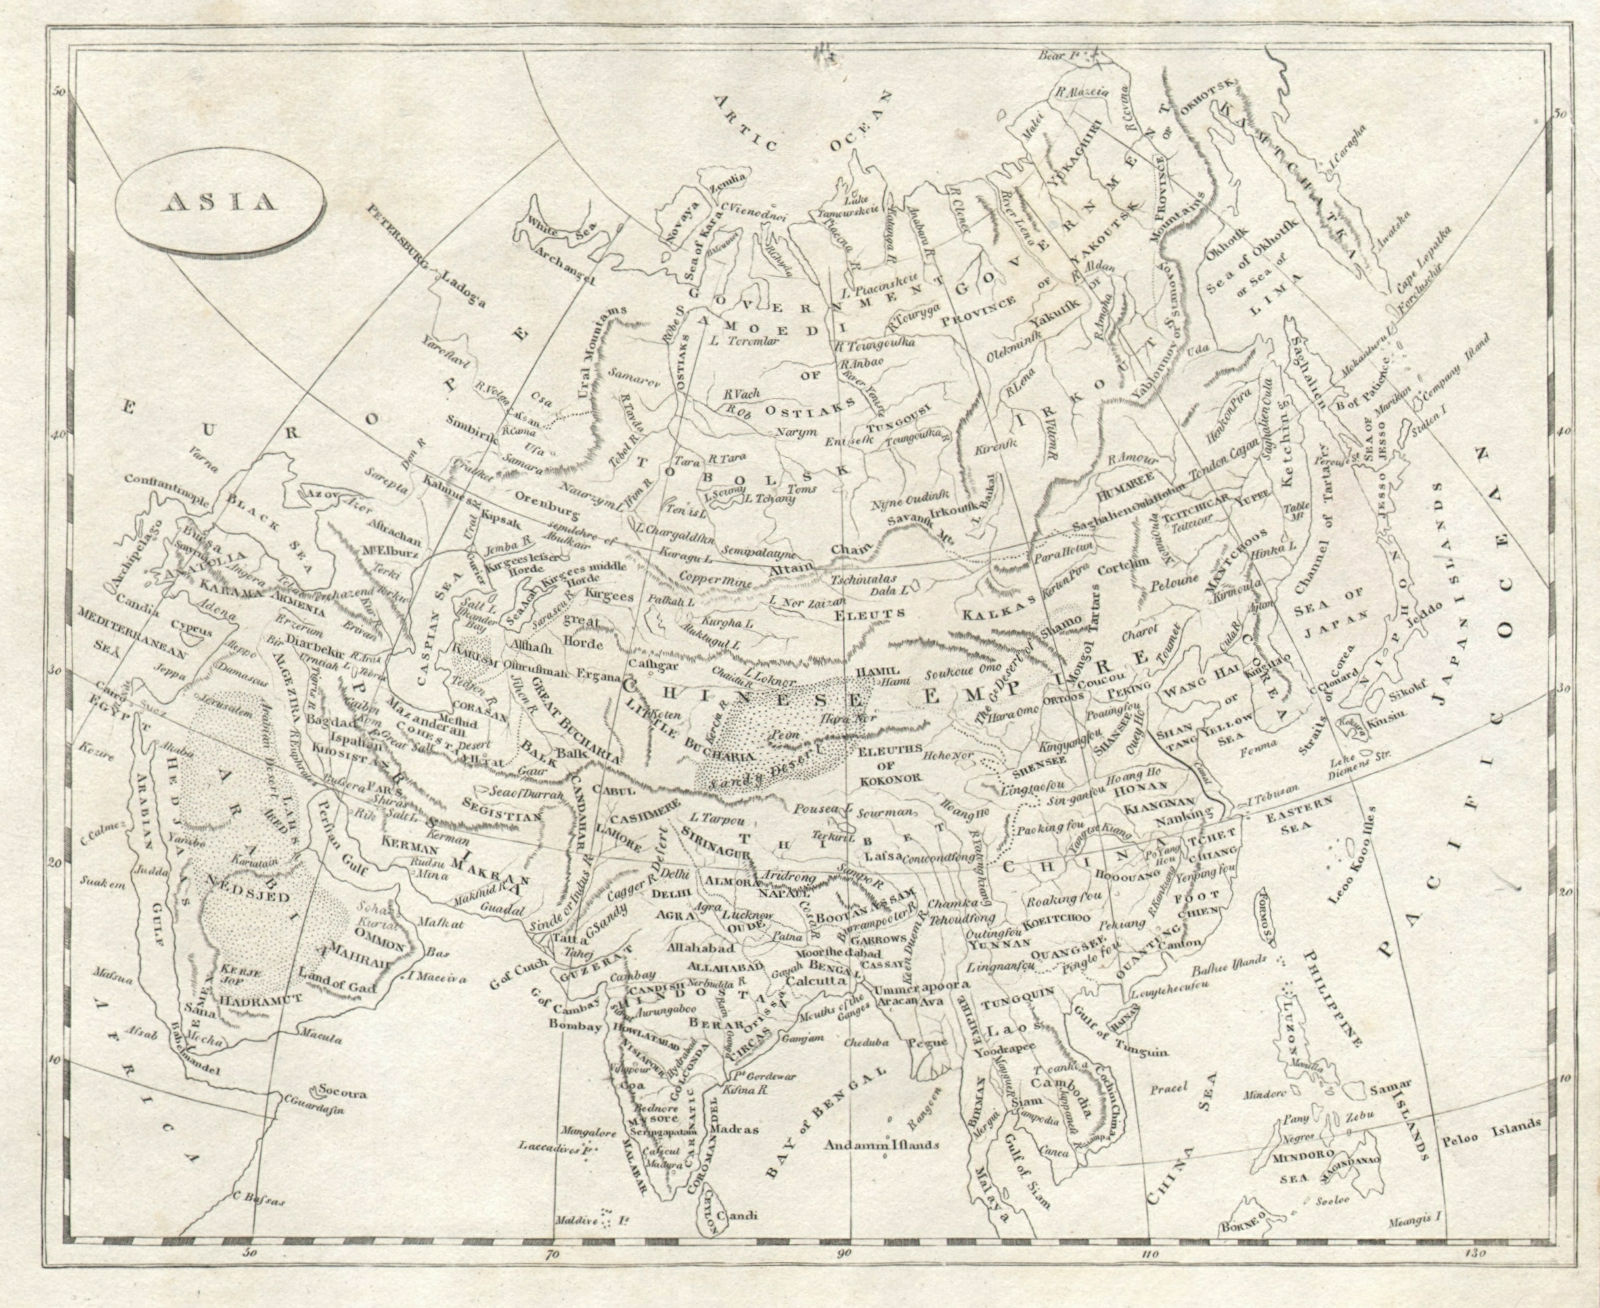 Associate Product Asia by Arrowsmith & Lewis. Arabia. Chinese Empire 1812 old antique map chart